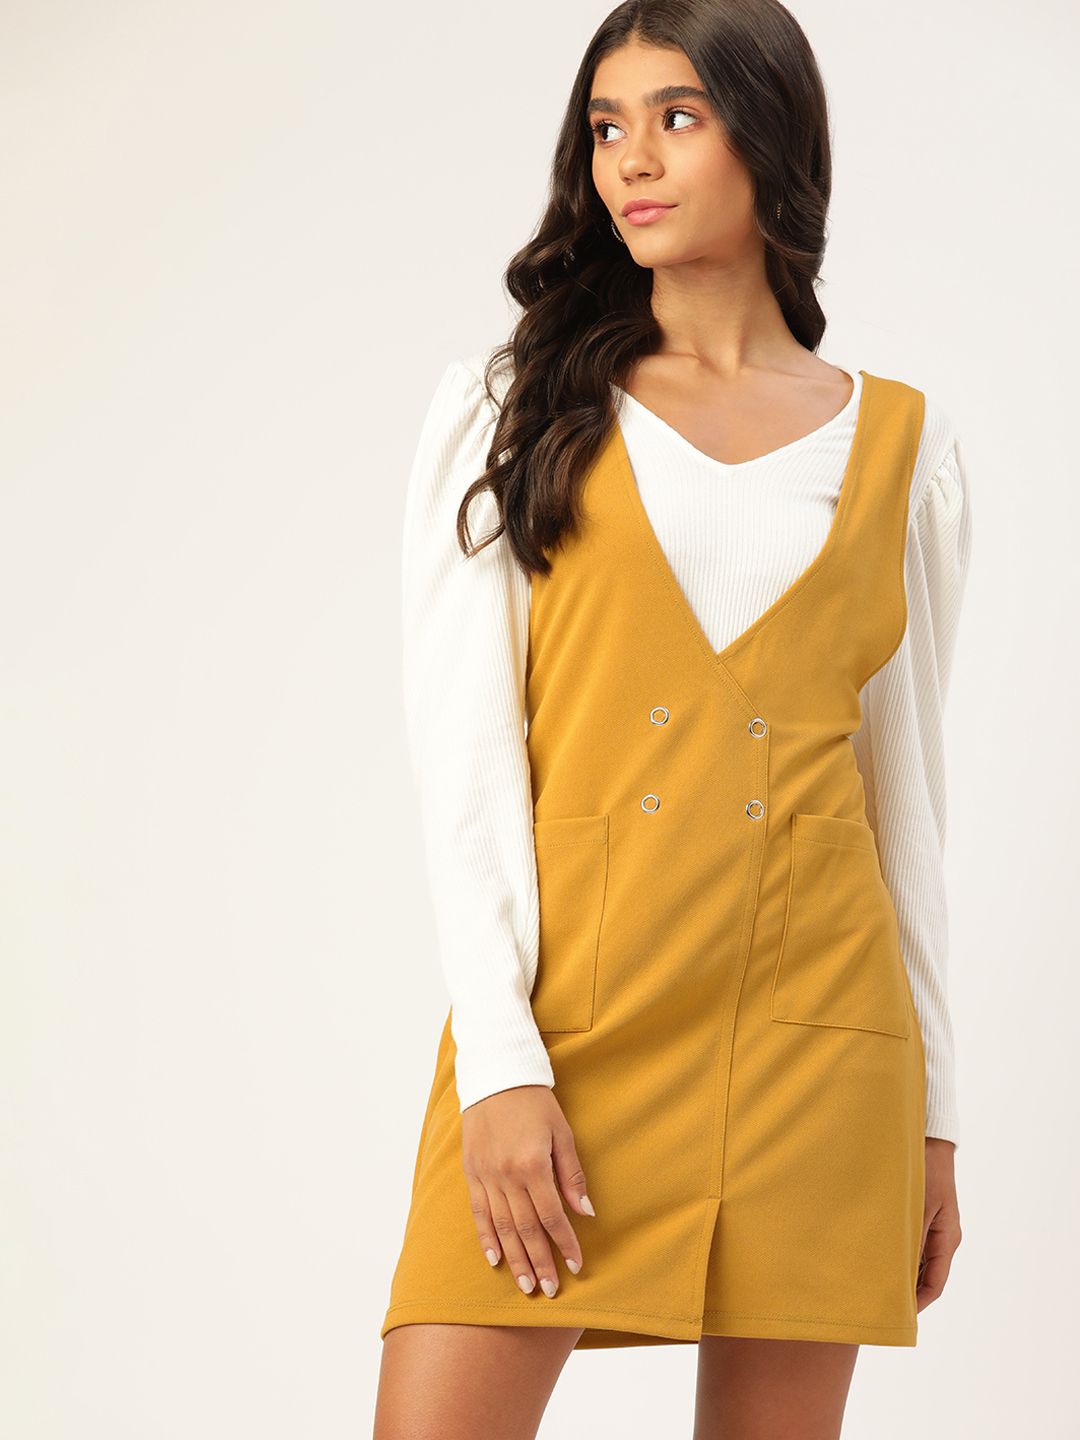 DressBerry Mustard Yellow Textured Effect Pinafore Dress Price in India